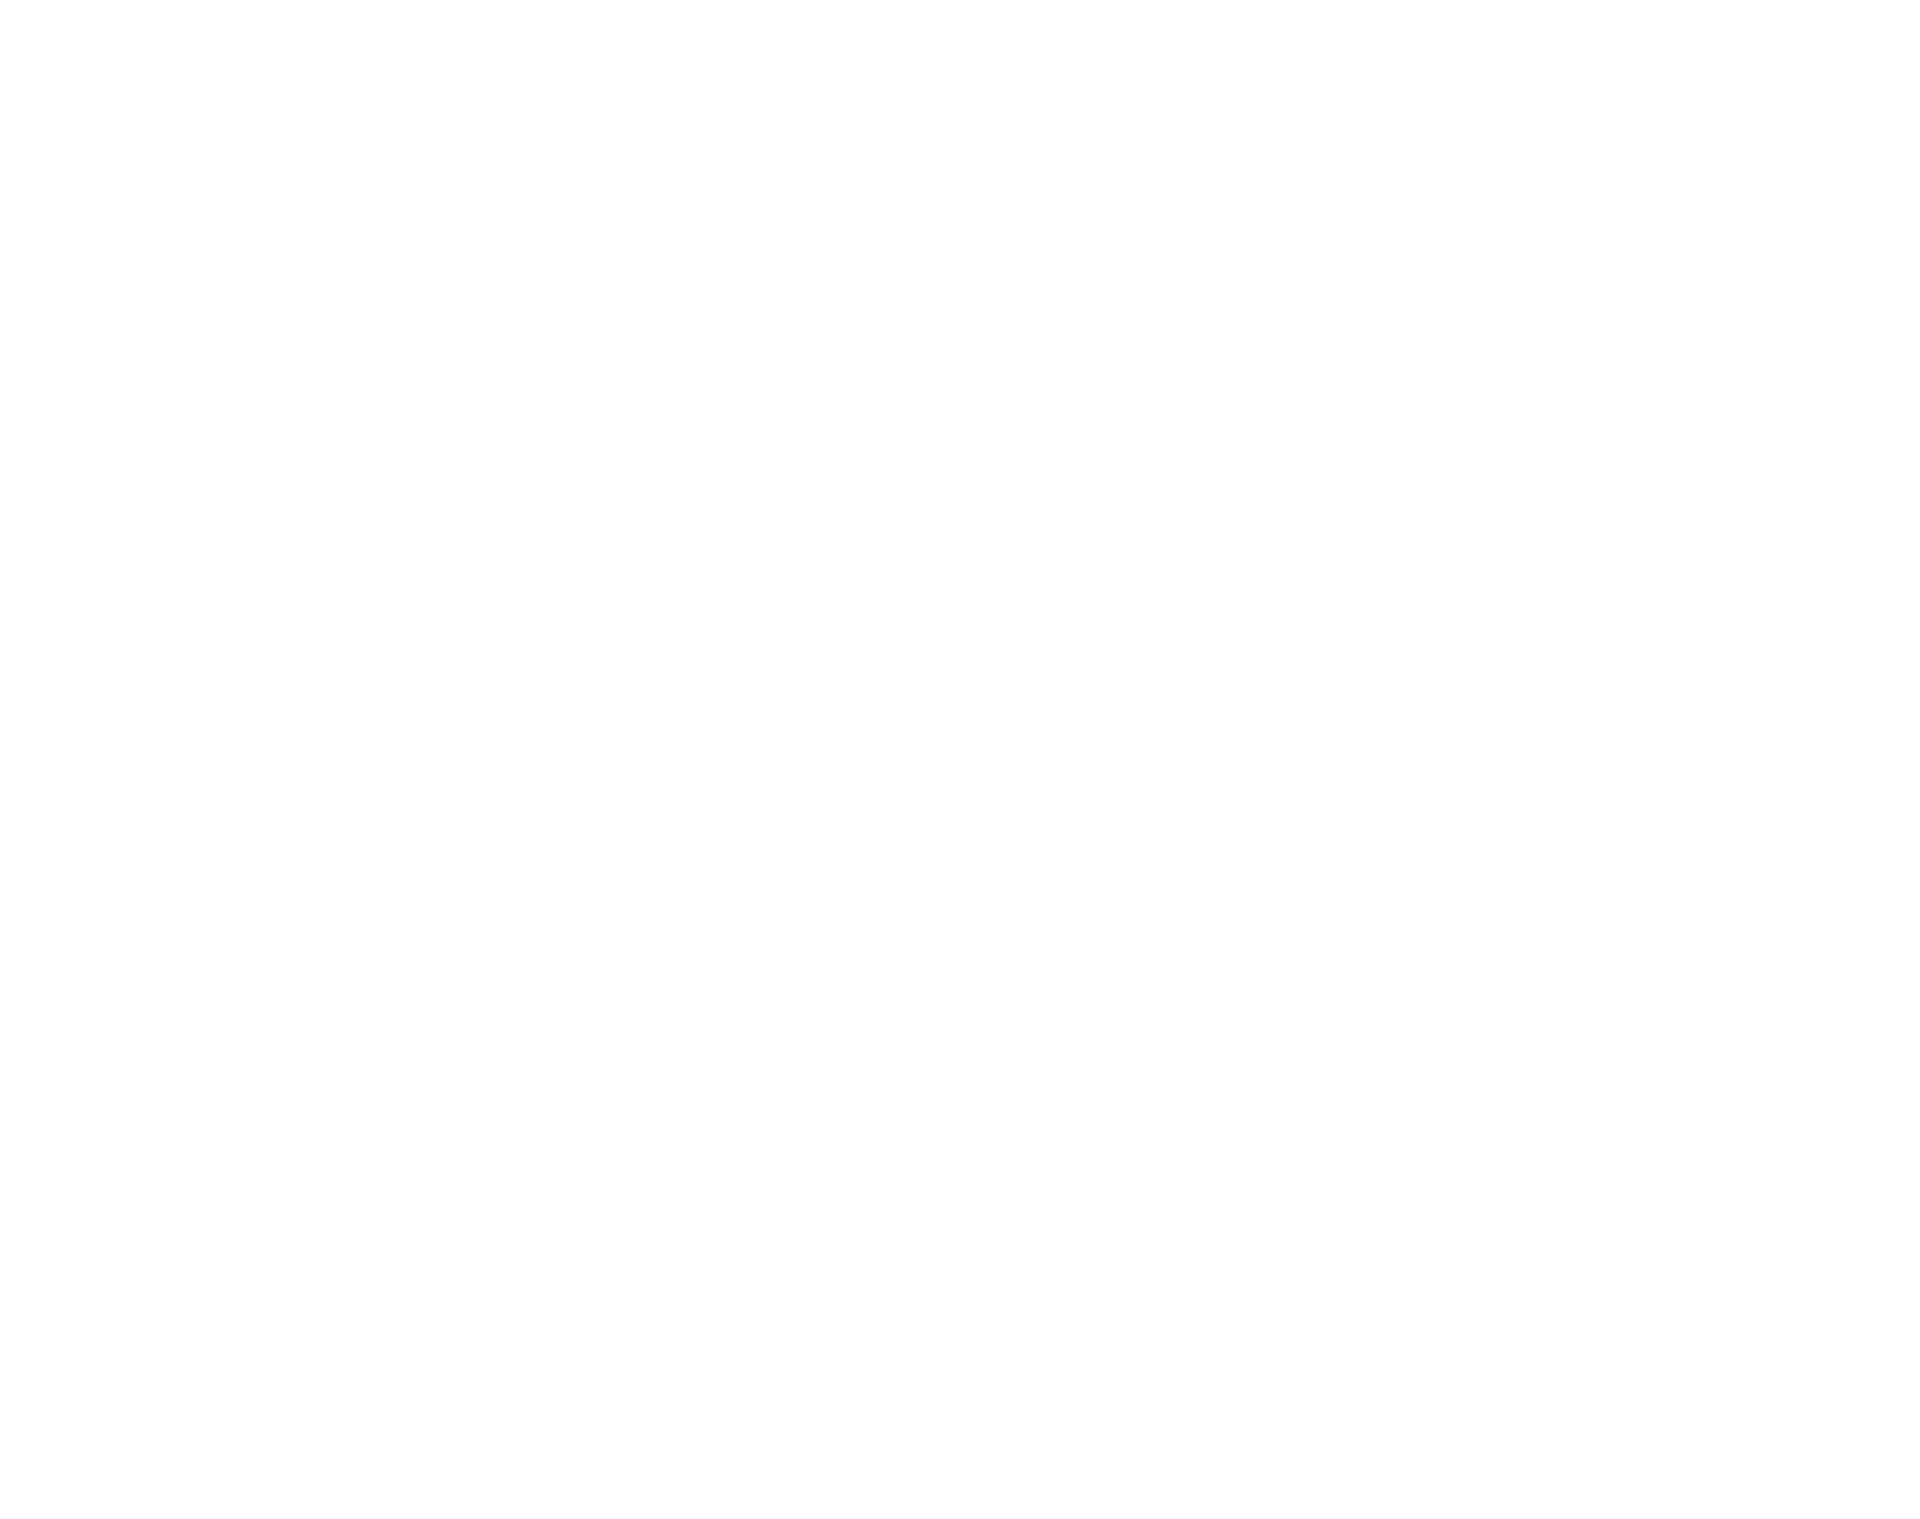 L & S Concrete logo in white background in St. Charles County MO 